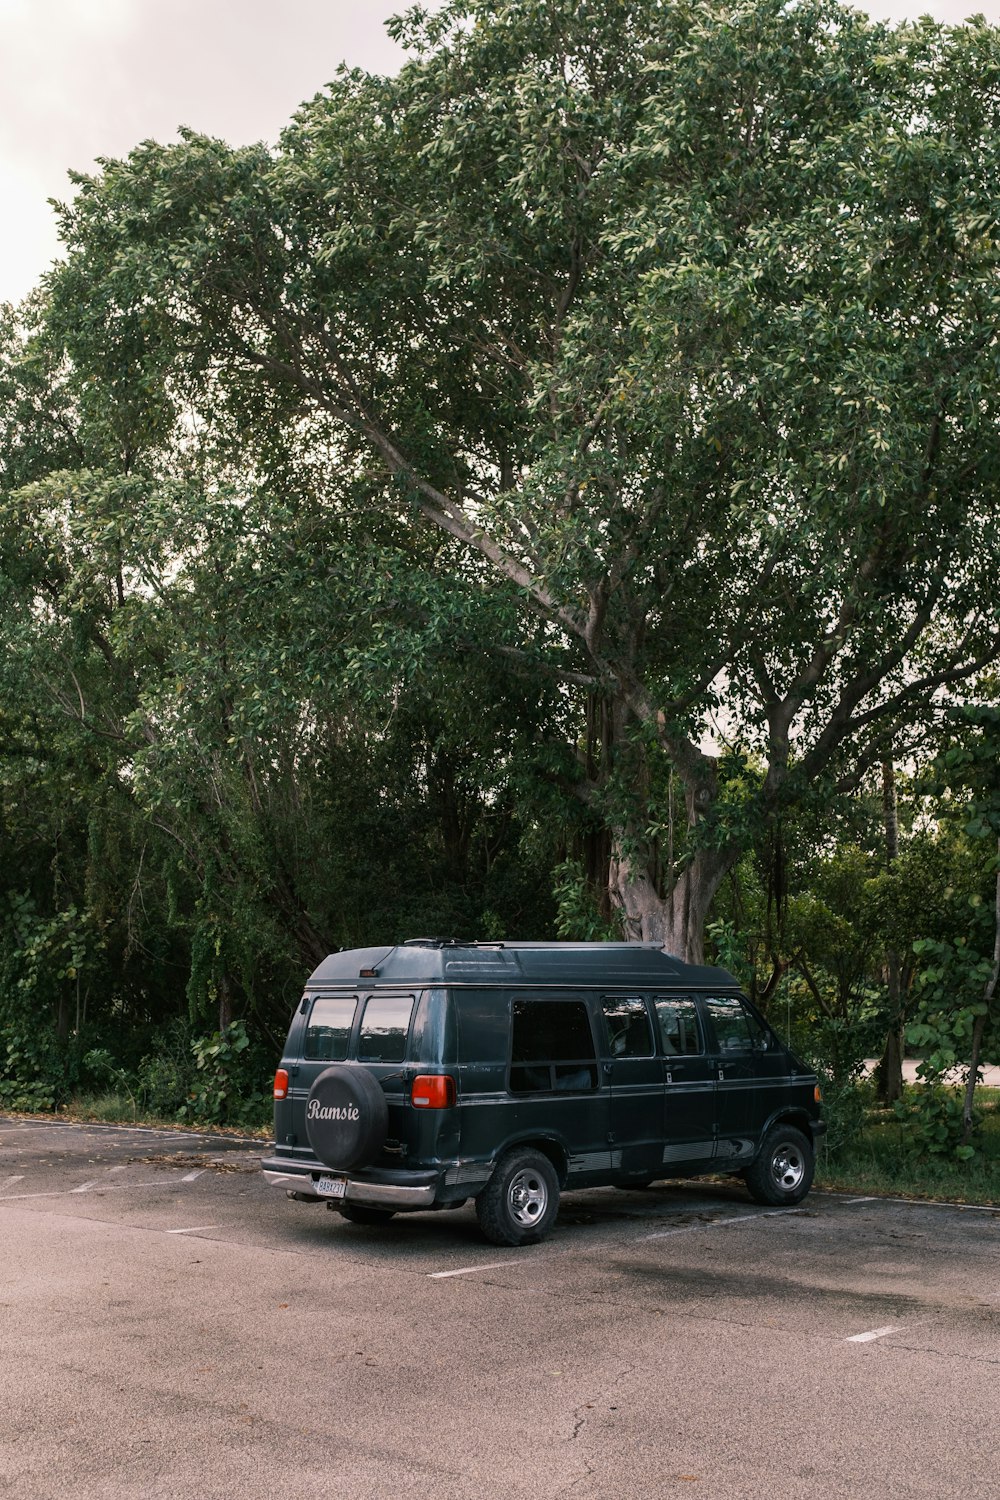 a van parked in a parking lot next to a tree